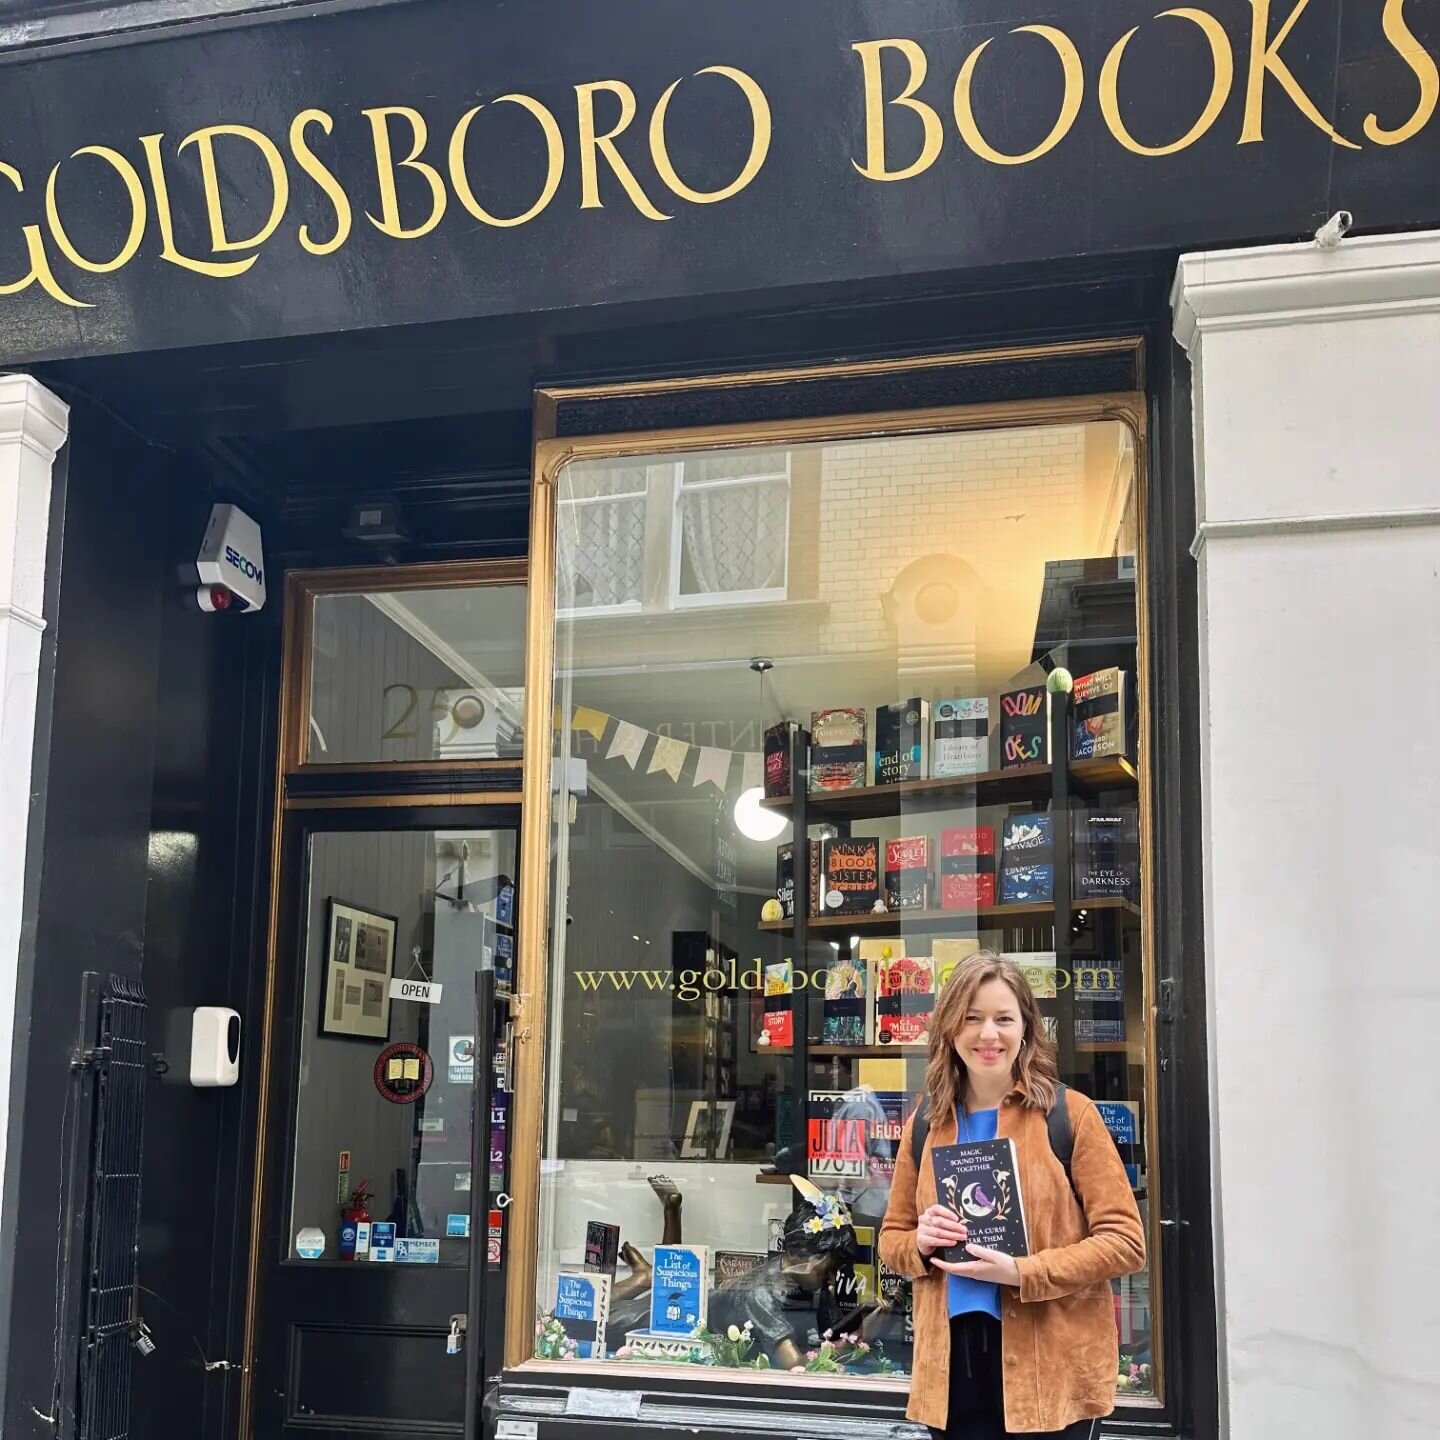 The #Shadowstitch proof on tour ✌ 

At one of my favourite book shops and most magical places in London @goldsborobooks 💫🌙

.
.
.

#bookproof #Threadneedle #bookquotes #ravens #witchpower #bookcover #bookcoverdesign #quotesgram #bookmagic #bookstag